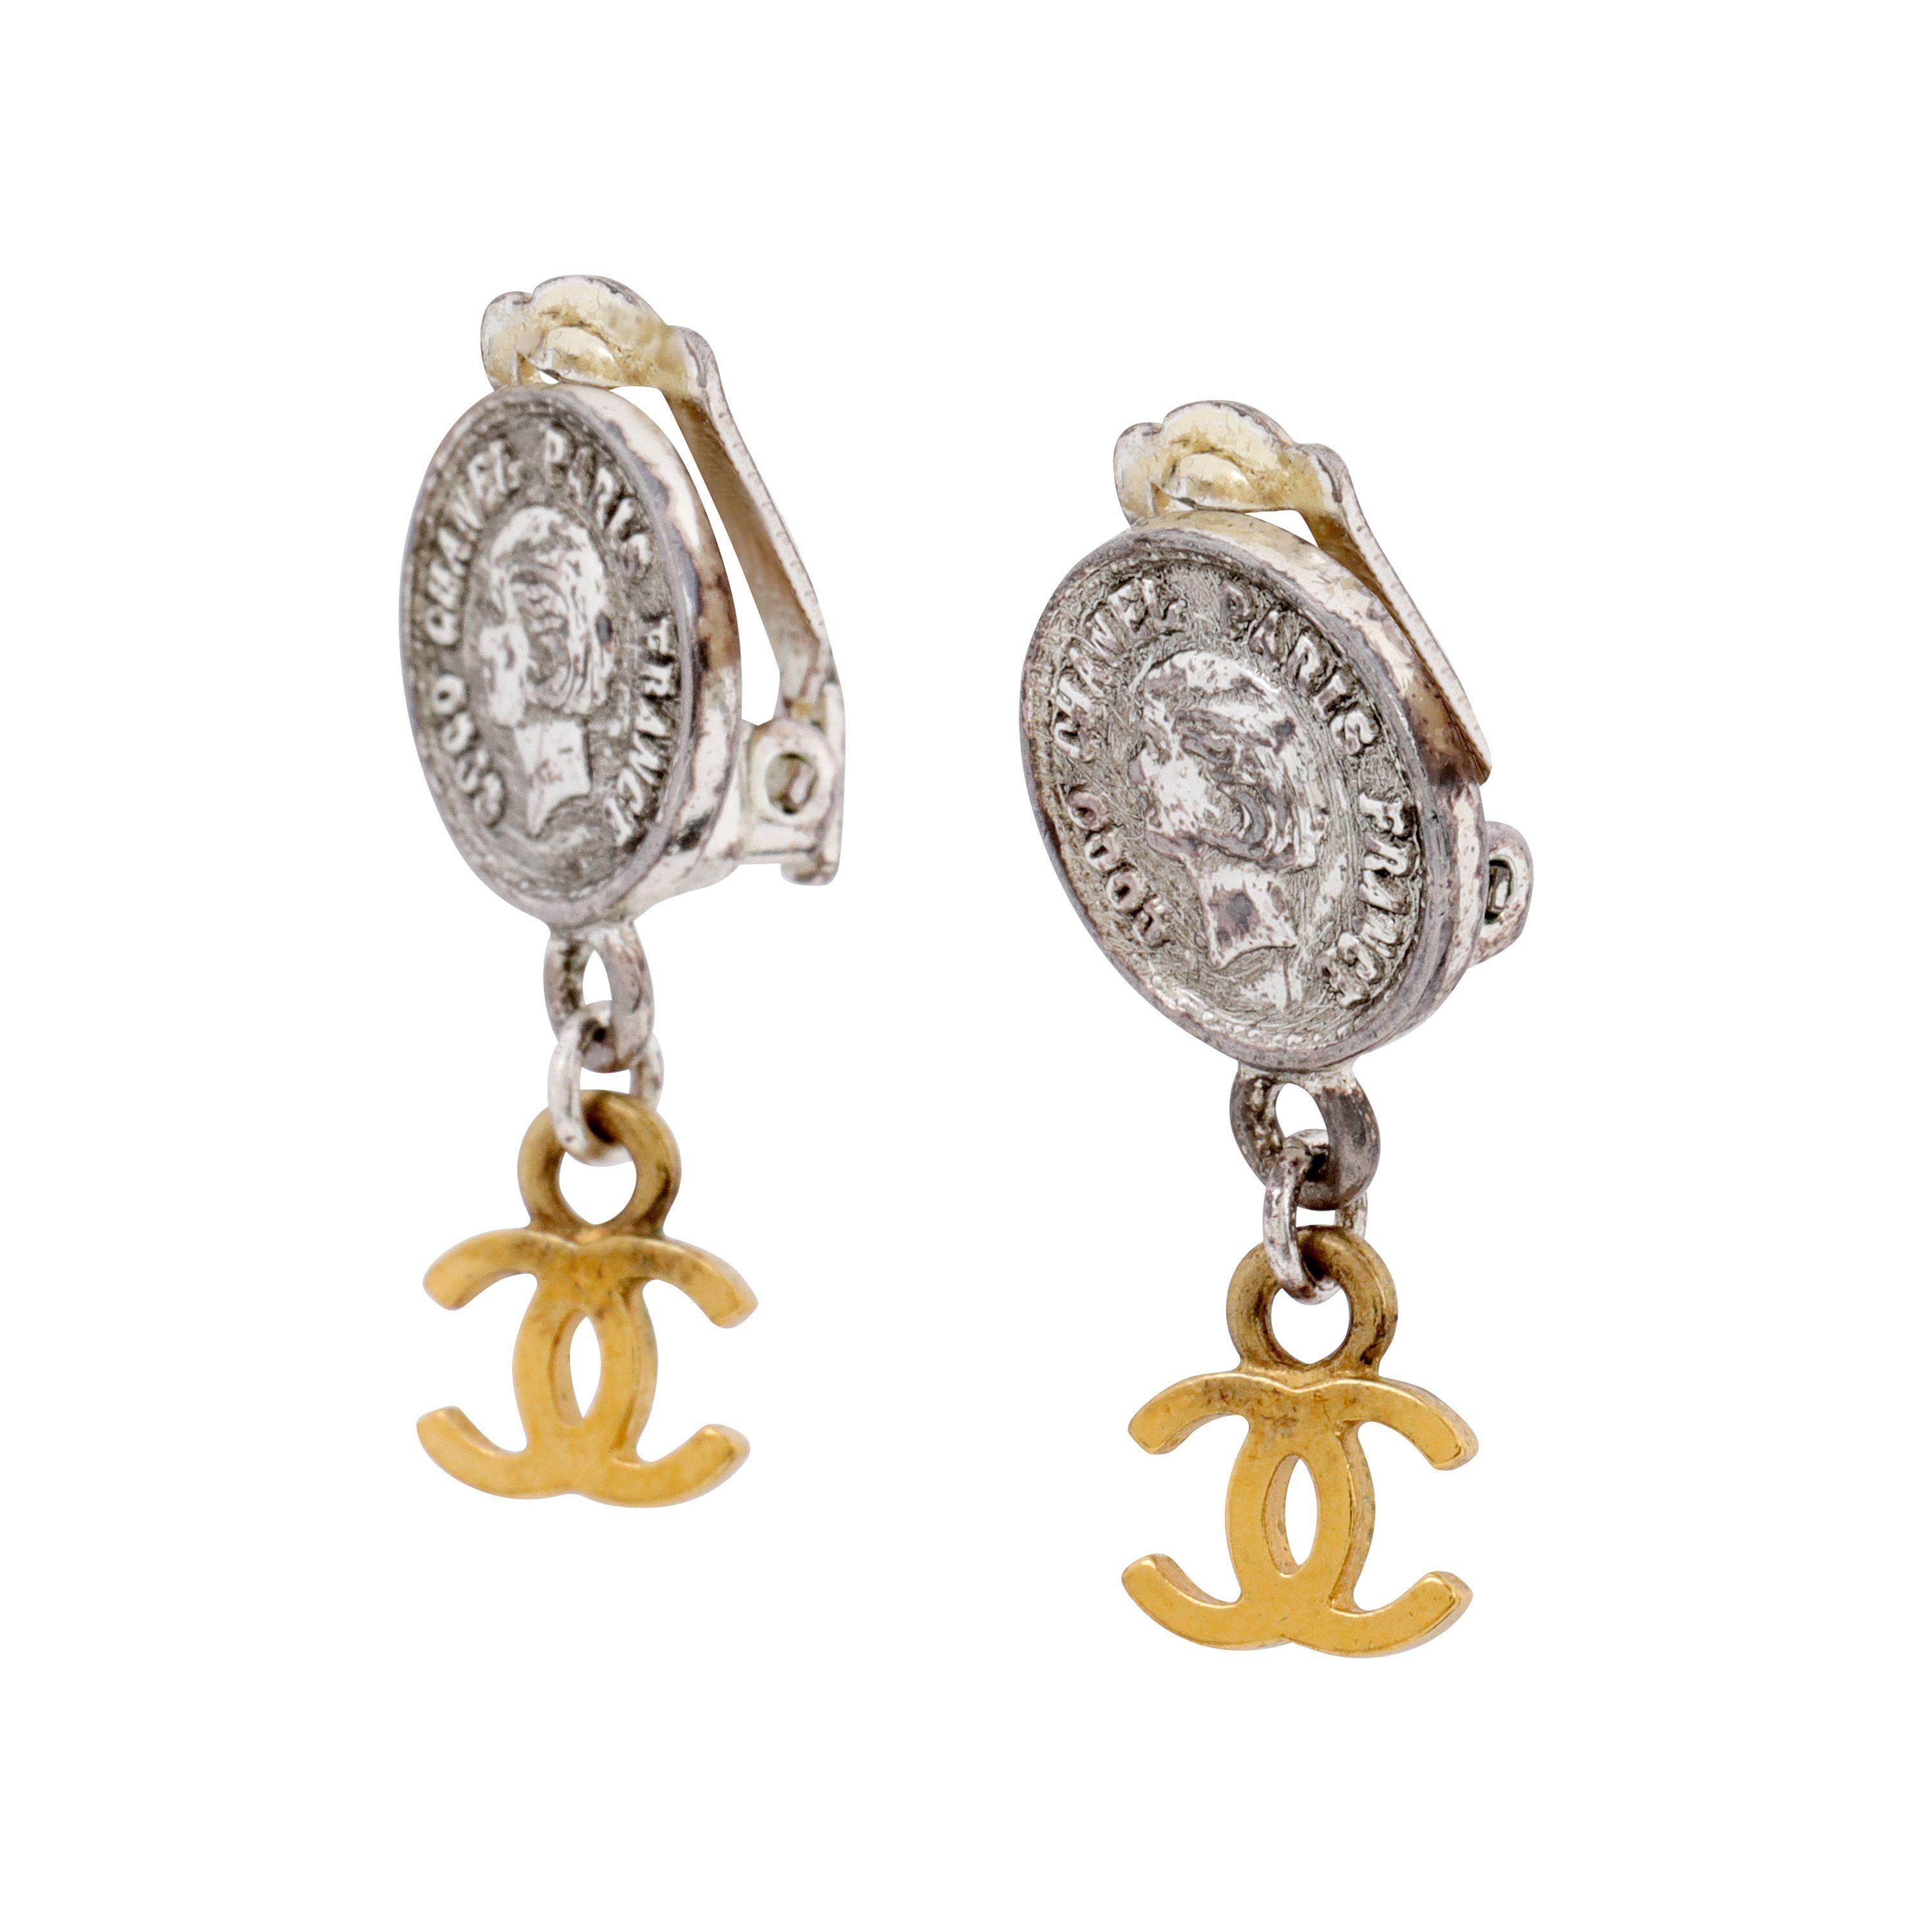 These authentic Chanel Silver Coco Coin Dangle Earrings are in excellent condition from the Spring 1997 Collection.  Silver “coins” featuring Coco in profile with clip on backs.  Gold tone interlocking CC dangles delicately.    Made in France. Pouch